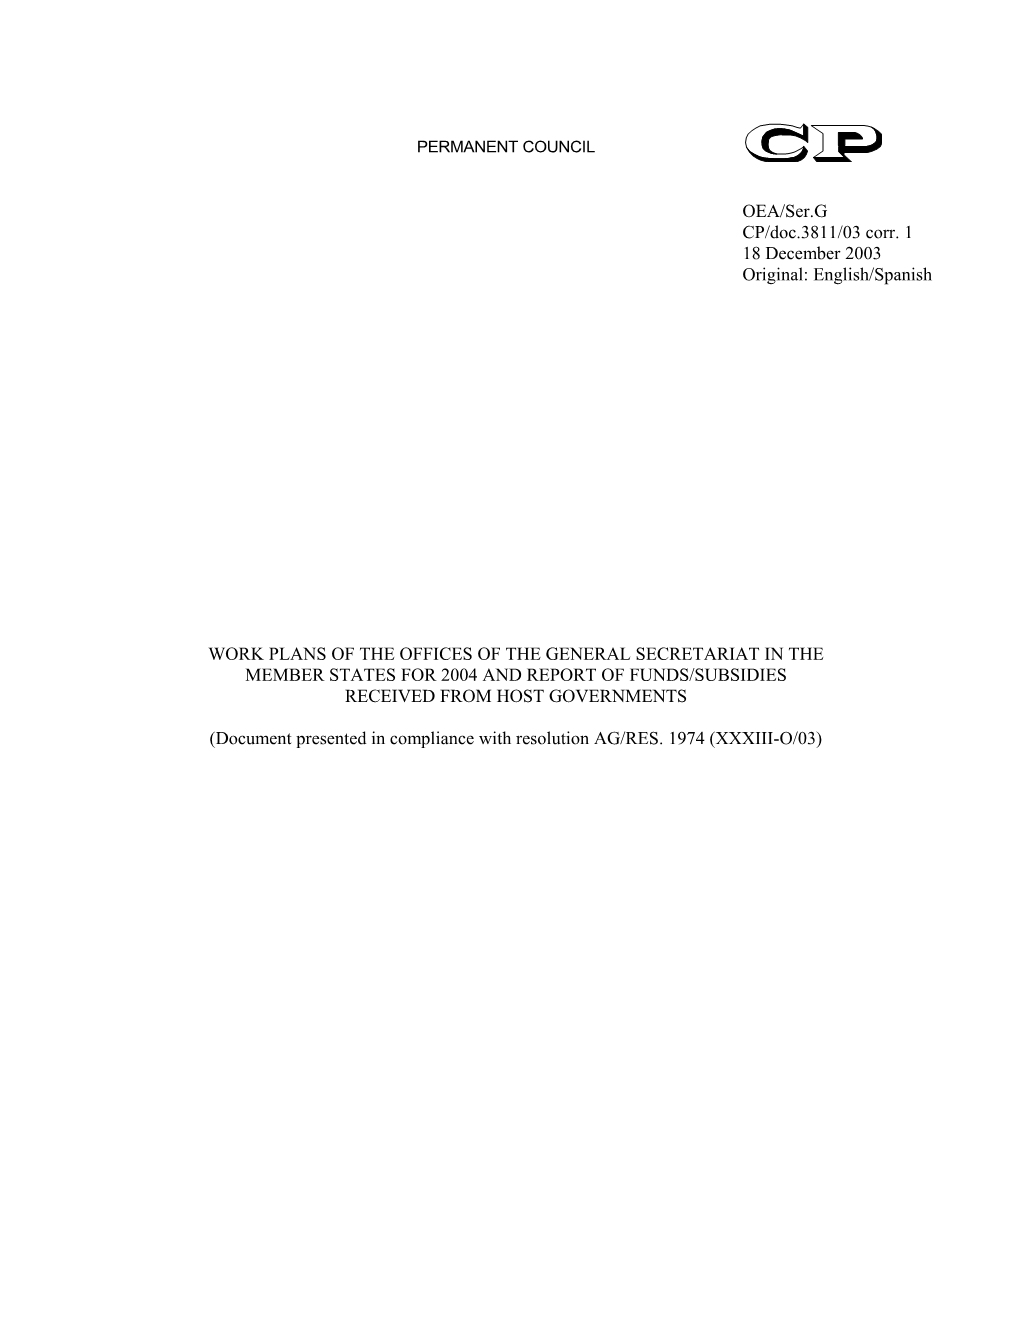 Document Presented in Compliance with Resolution AG/RES. 1974 (XXXIII-O/03